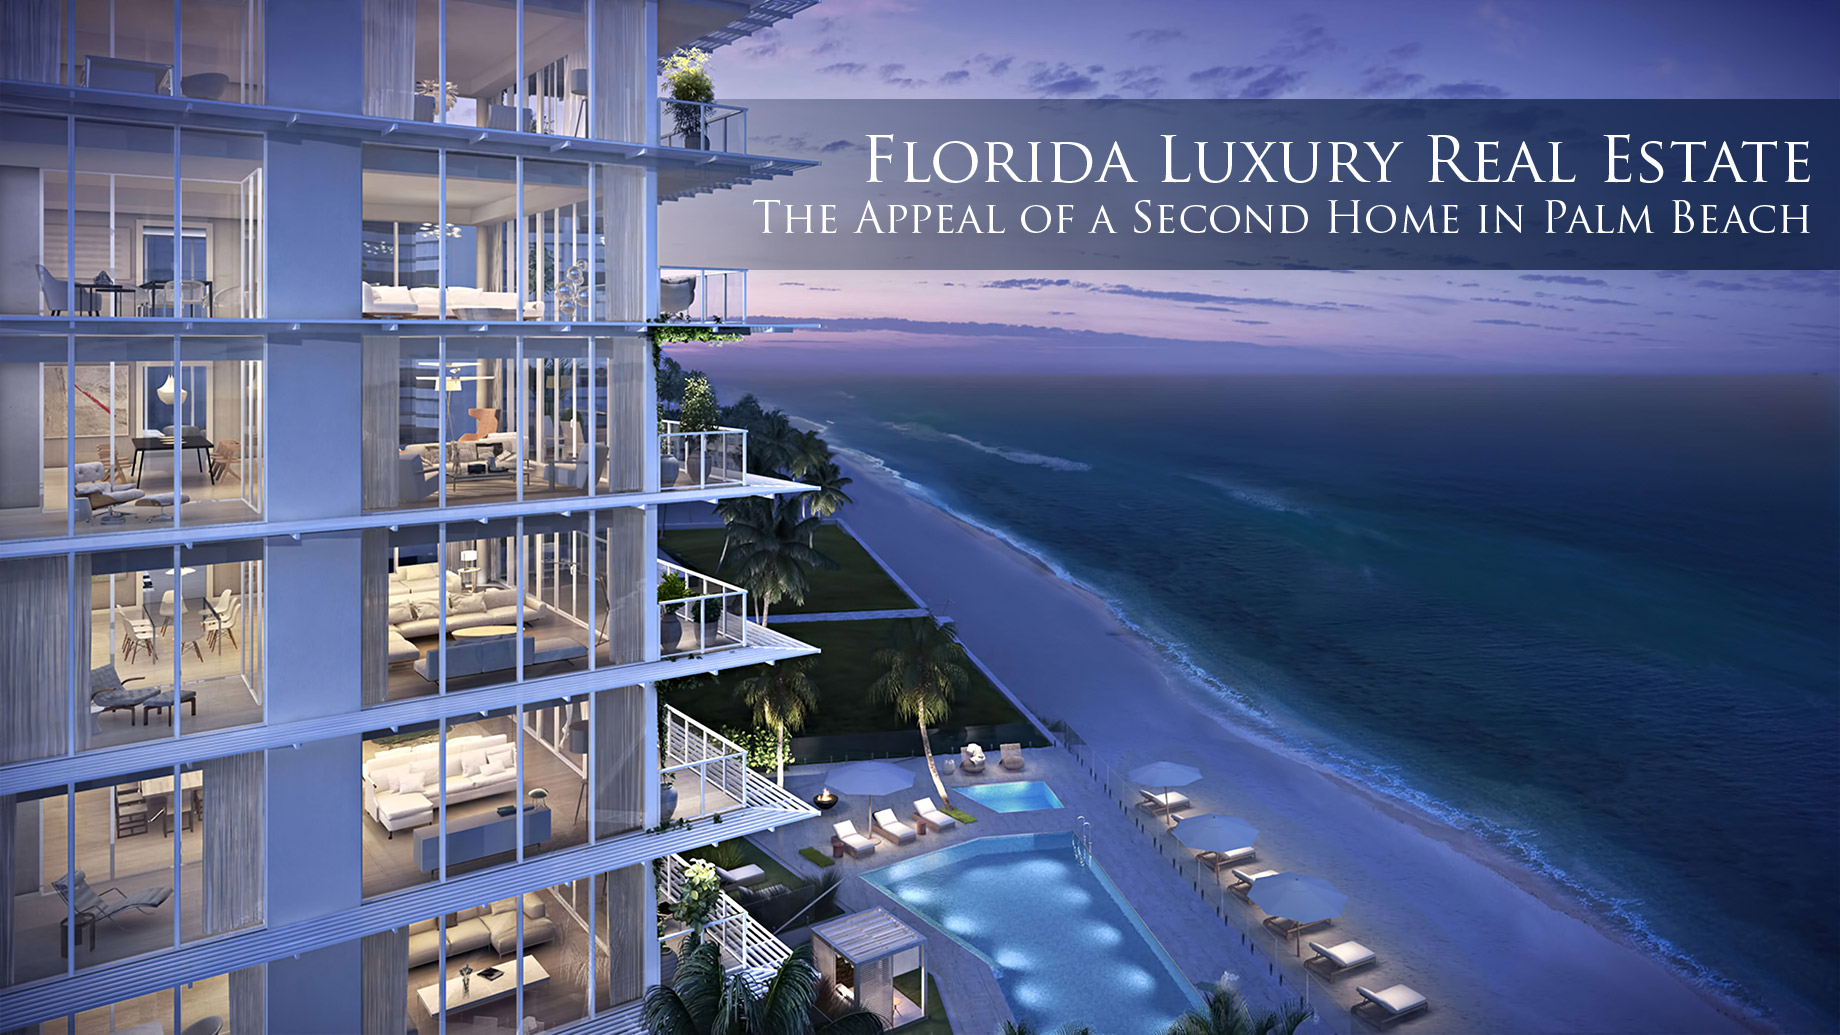 Florida Luxury Real Estate – The Appeal of a Second Home in Palm Beach